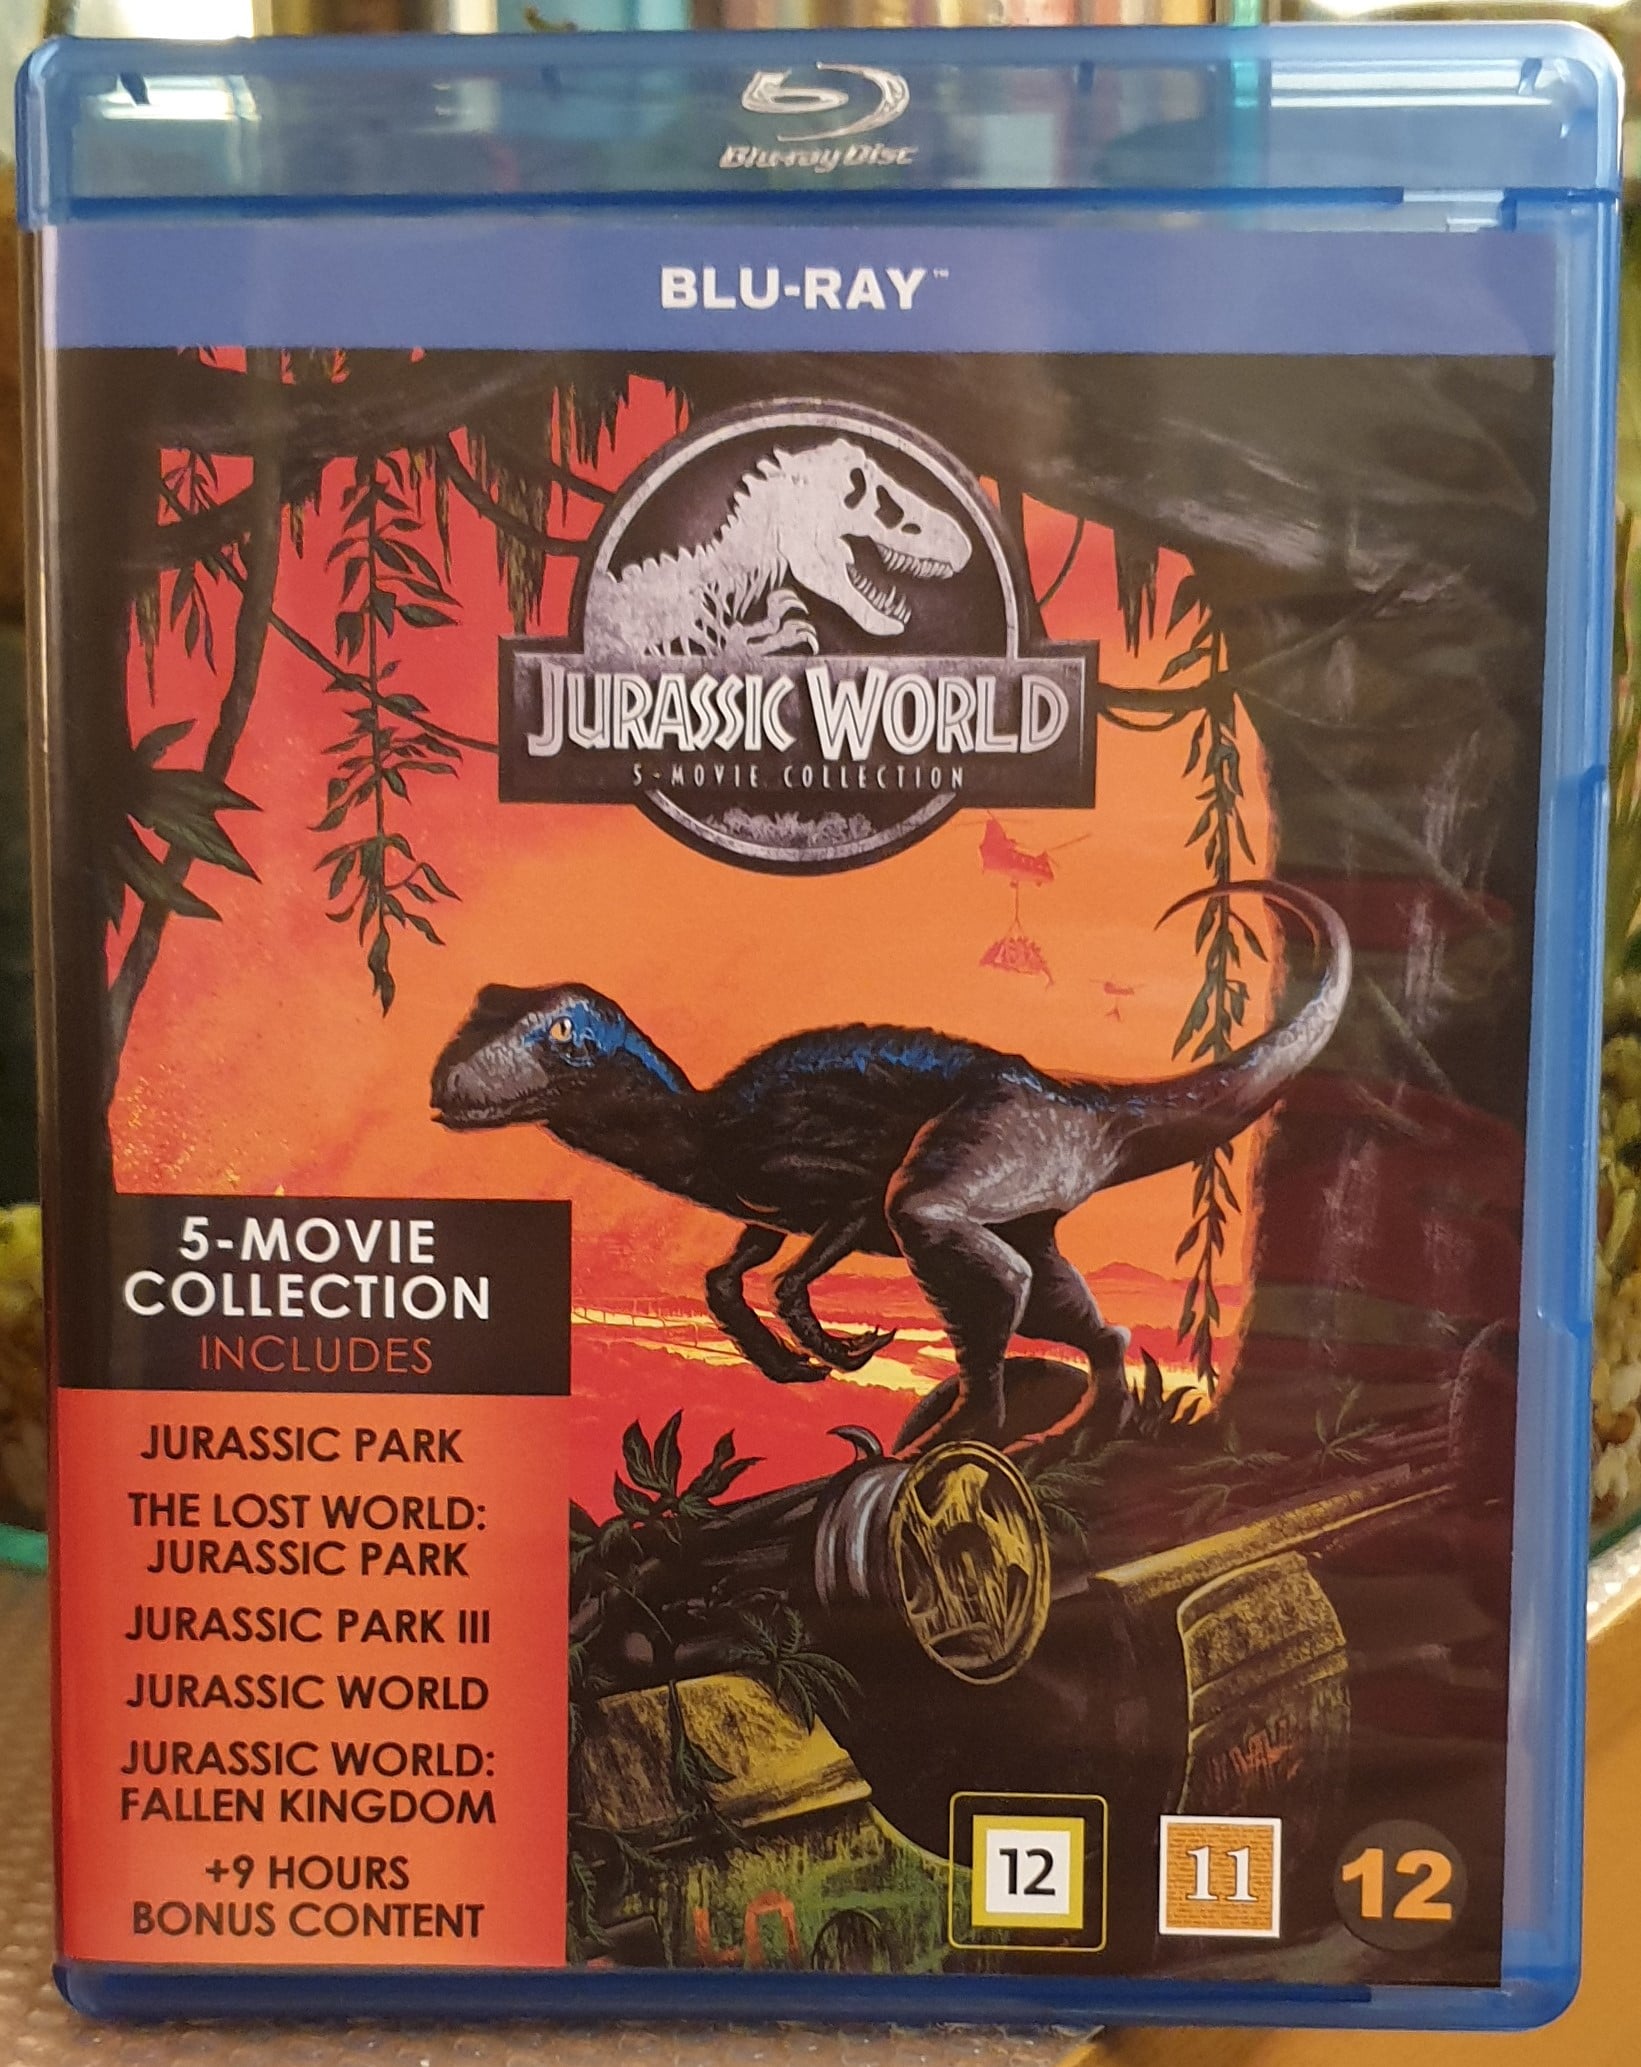 Jurassic World: 5-Movie Collection – Unixplorian Museum of Motion Pictures